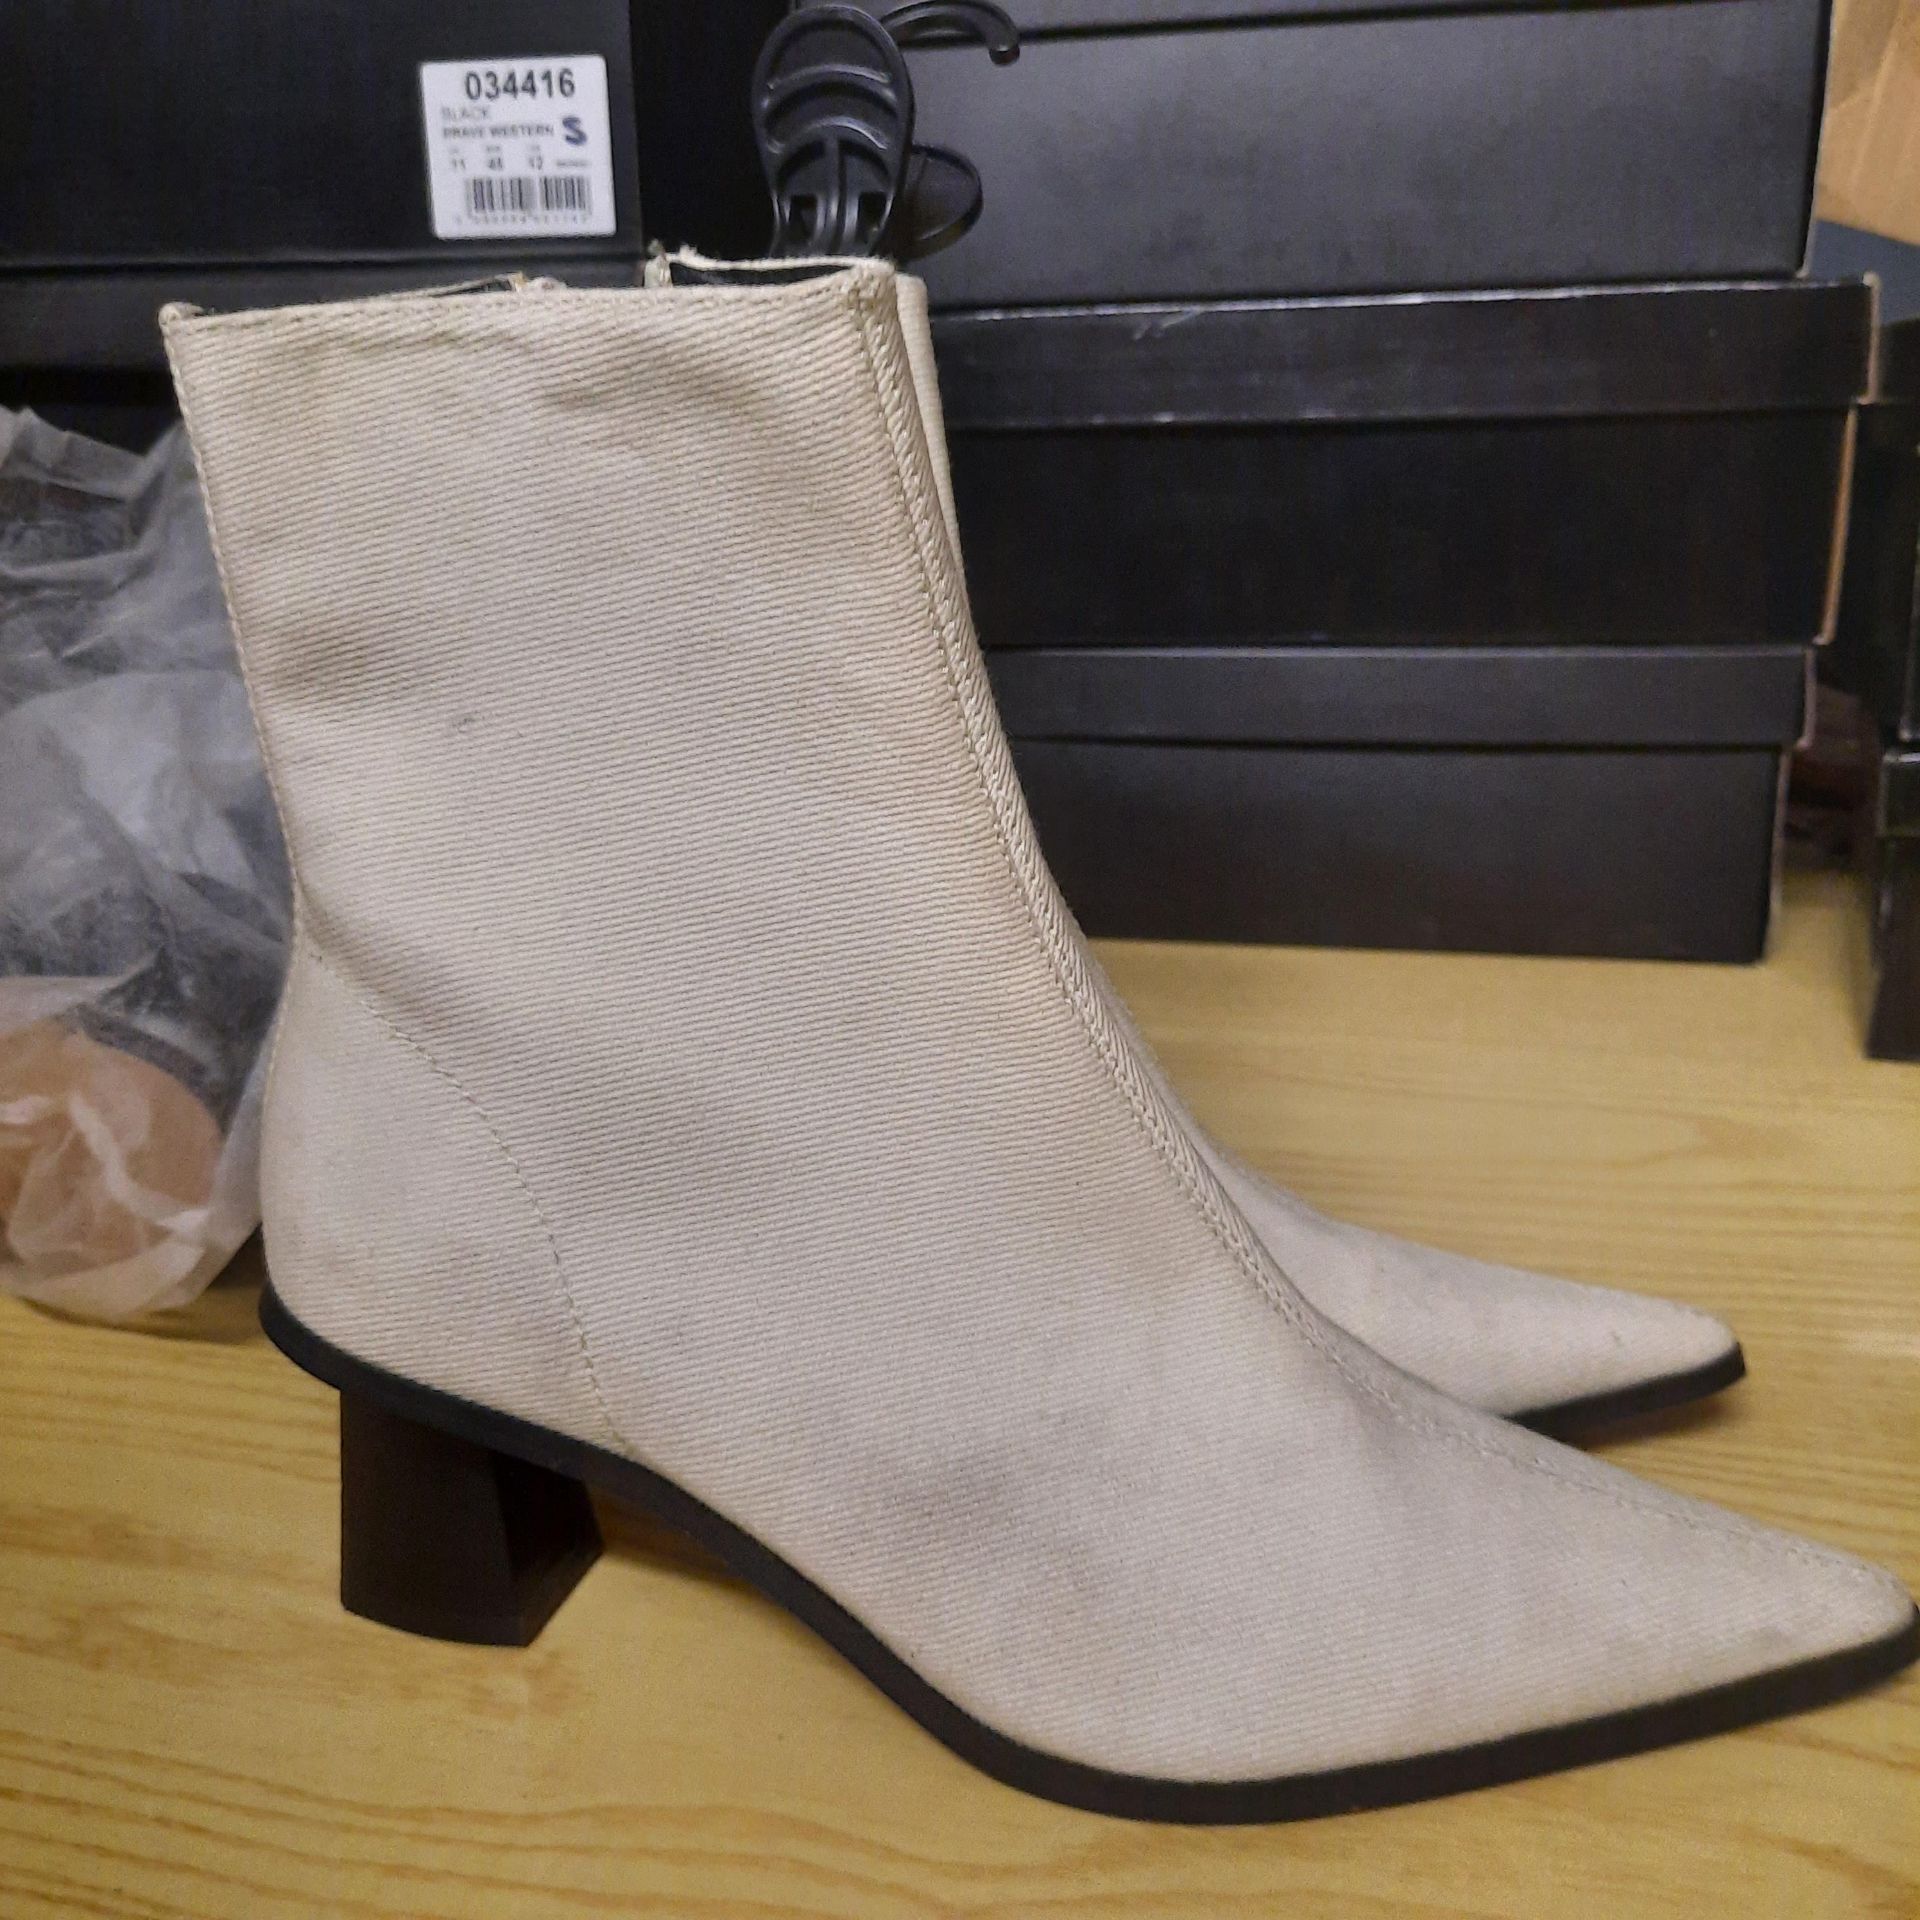 NEW & BAGUED WHITE MAILE LADIES BOOTS SLITTLY DIRT SIZE UK - 6/ EU - 39/ US - 8.5 COLLECTION BY